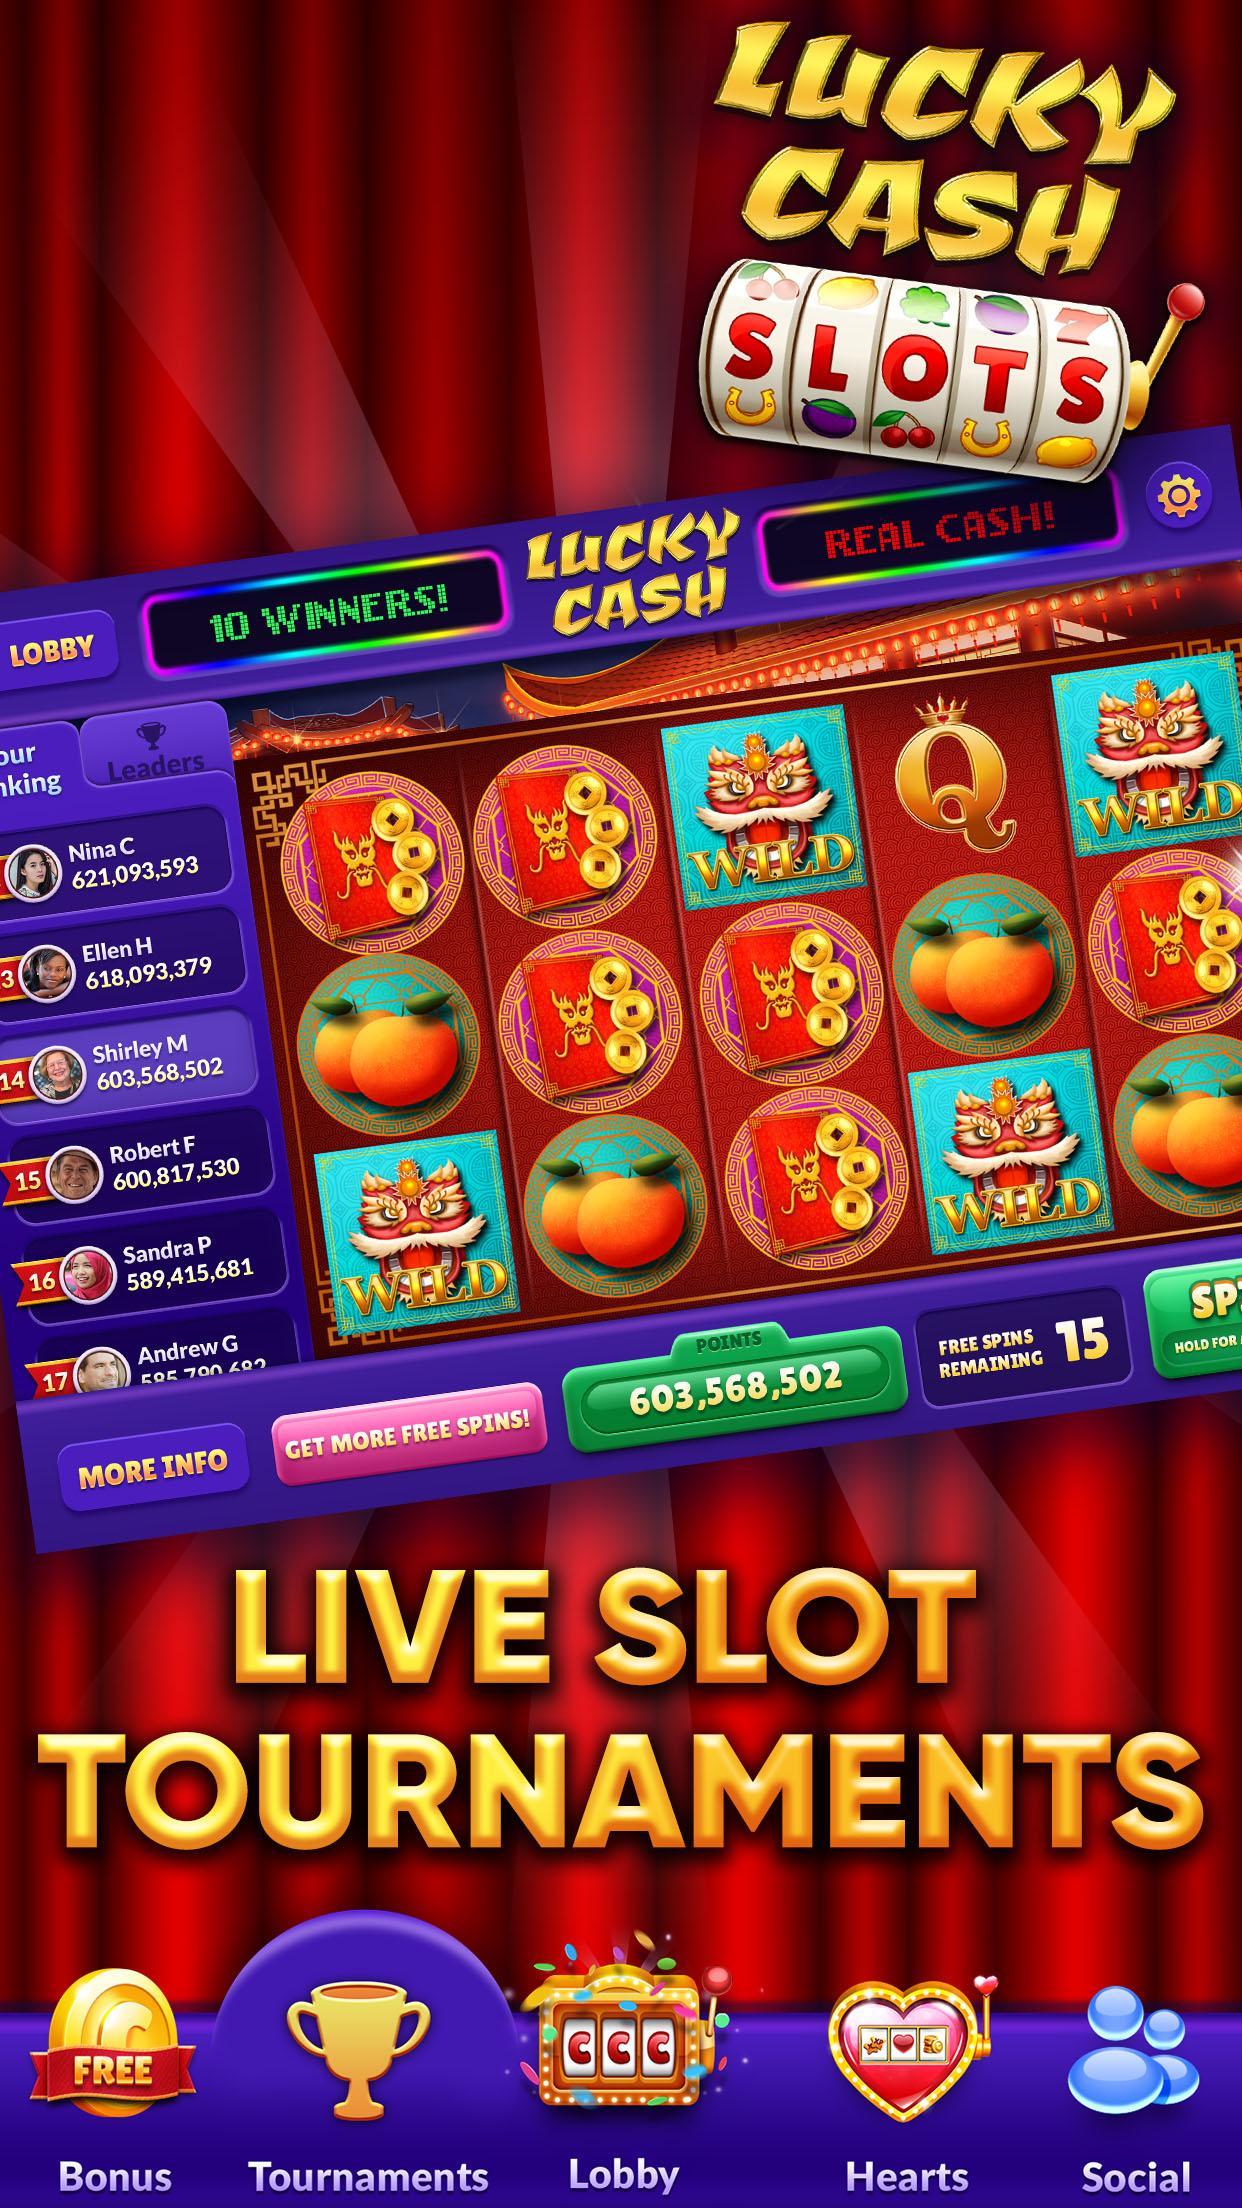 can you win real money on slot apps